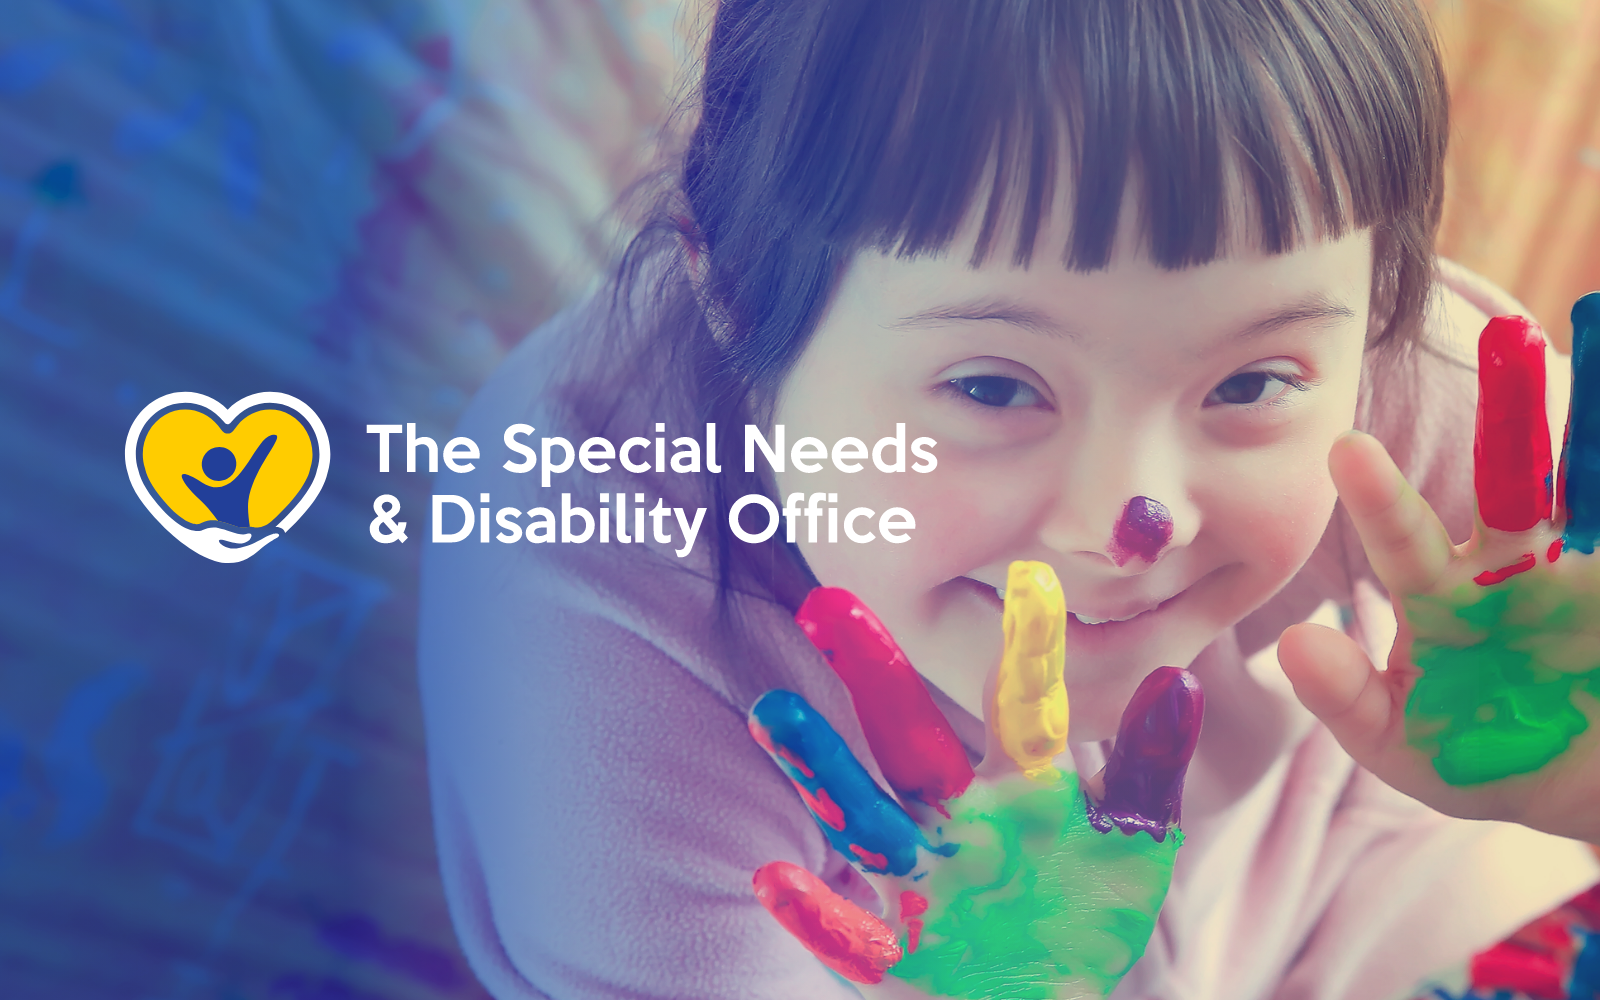 The Special Needs & Disability Office Image